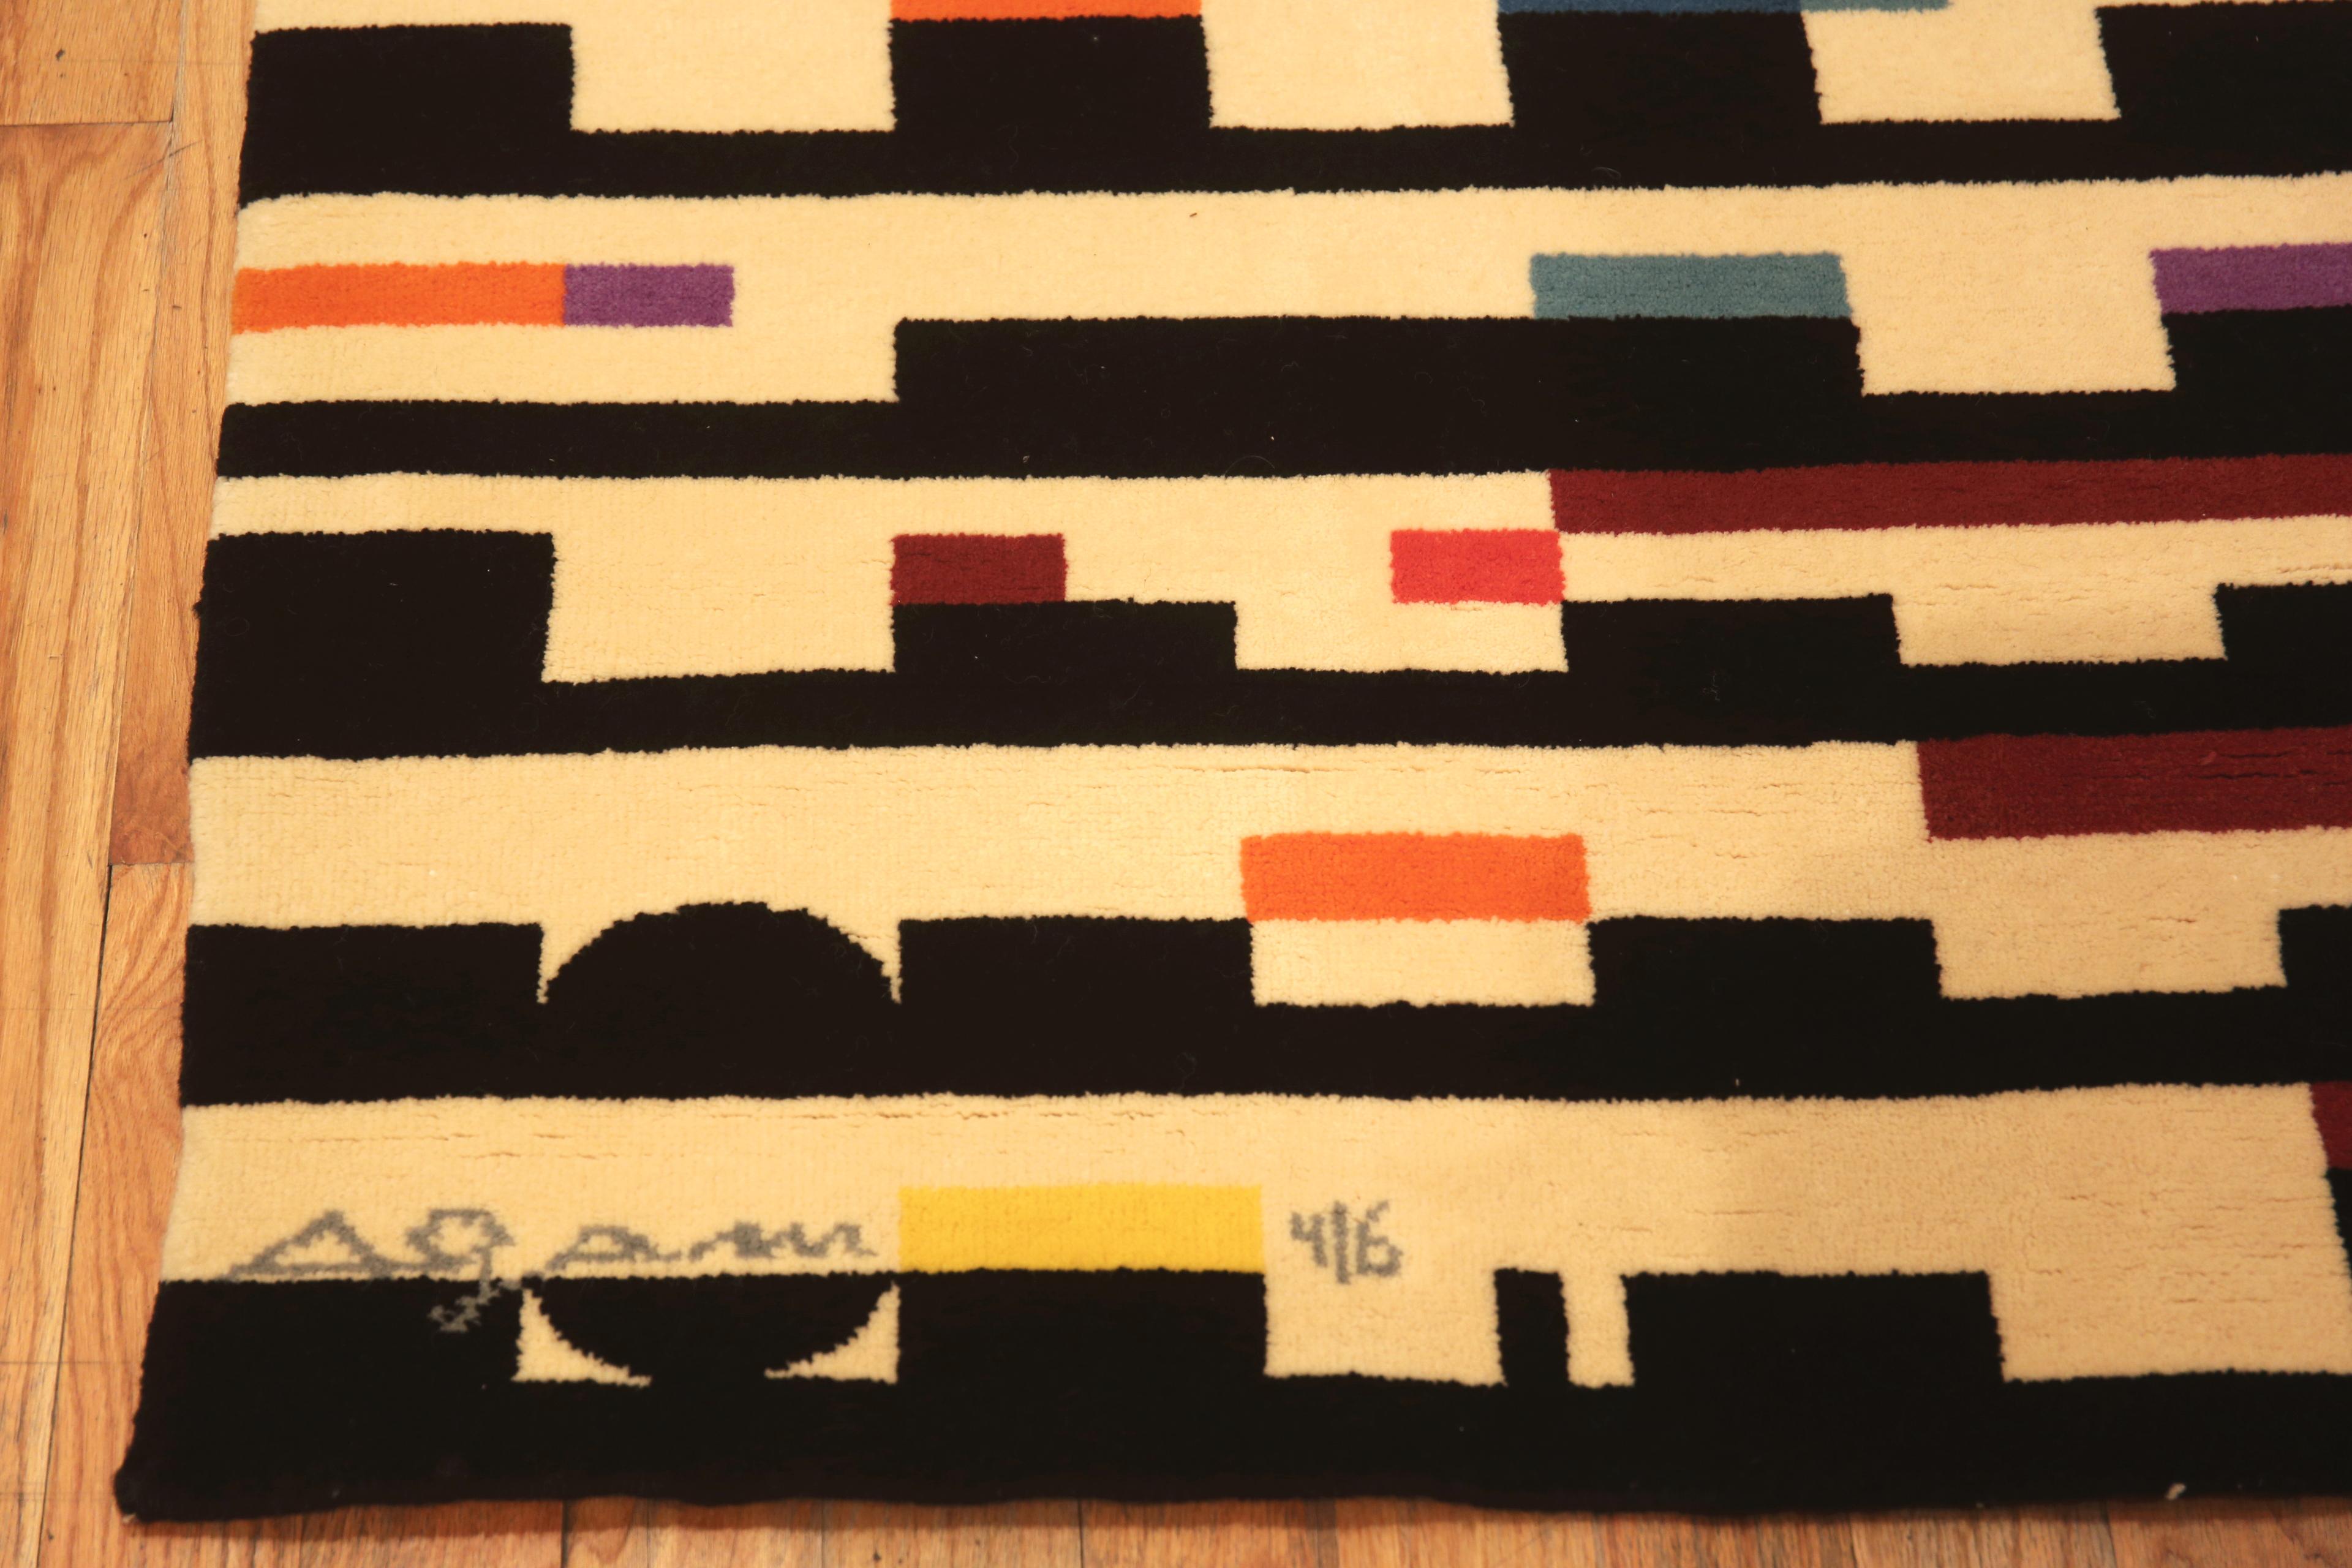 Other Vintage Israeli Rug By Yaacov Agam. 5 ft 11 in x 7 ft 3 in For Sale